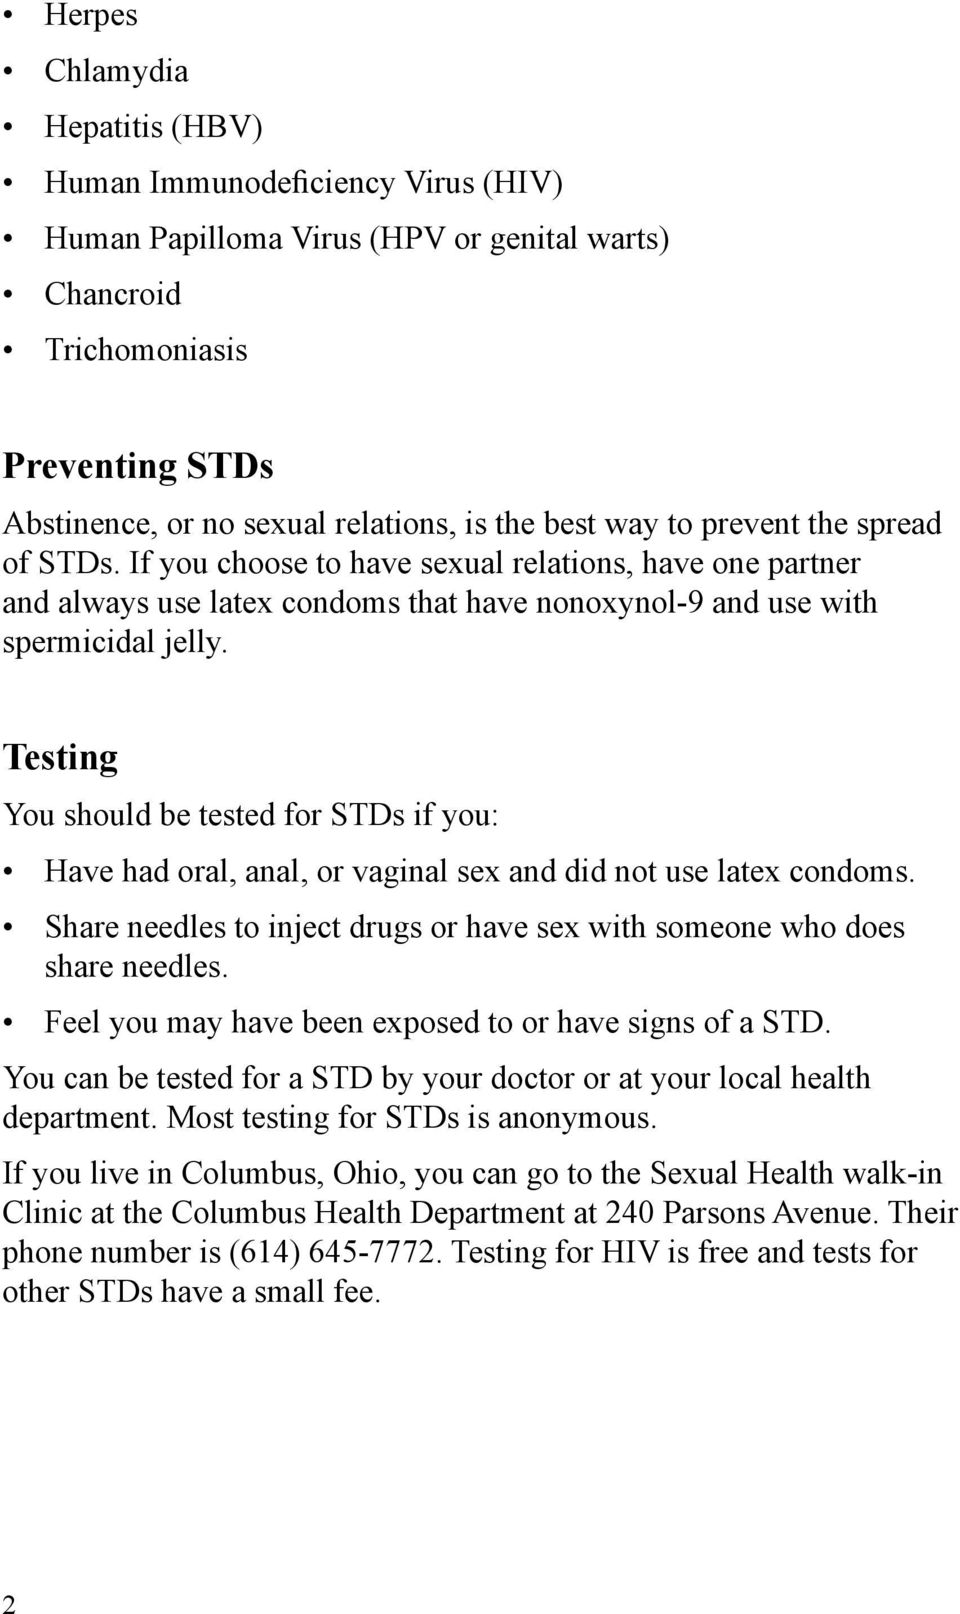 Testing You should be tested for STDs if you: Have had oral, anal, or vaginal sex and did not use latex condoms. Share needles to inject drugs or have sex with someone who does share needles.